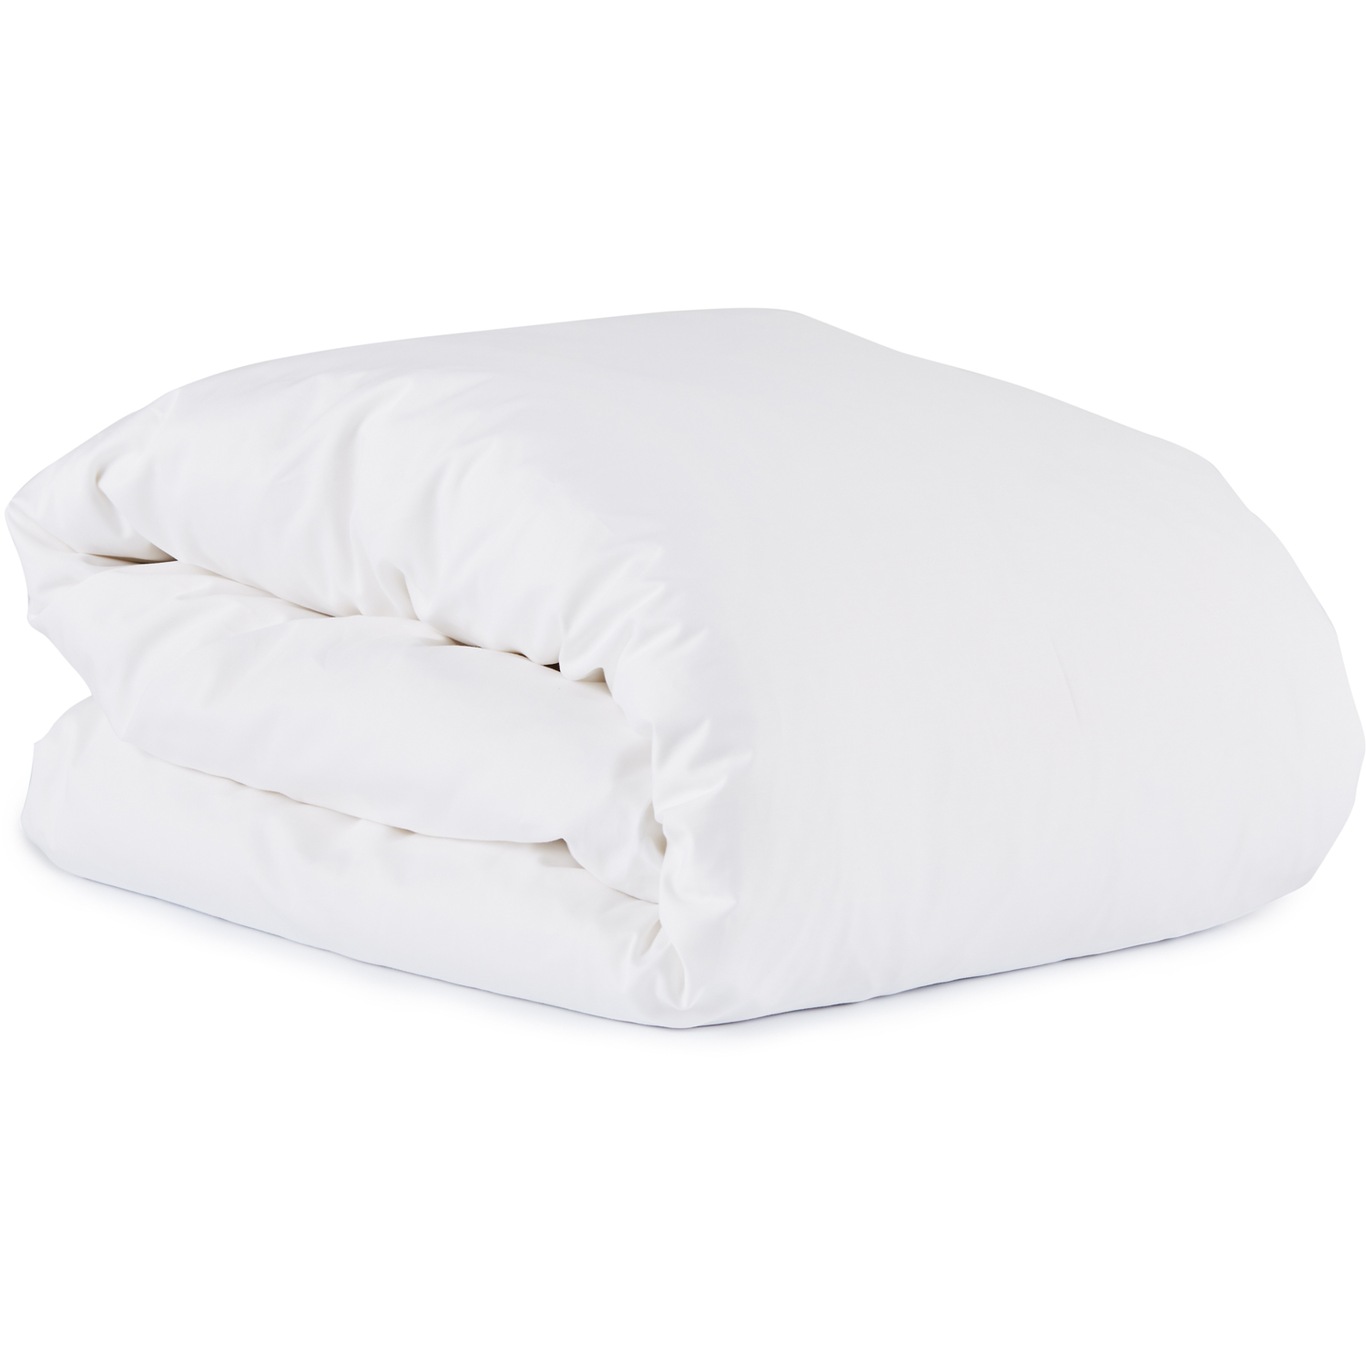 Satina Duvet Cover Eco White 140x220, What Are The Strings In A Duvet Cover For